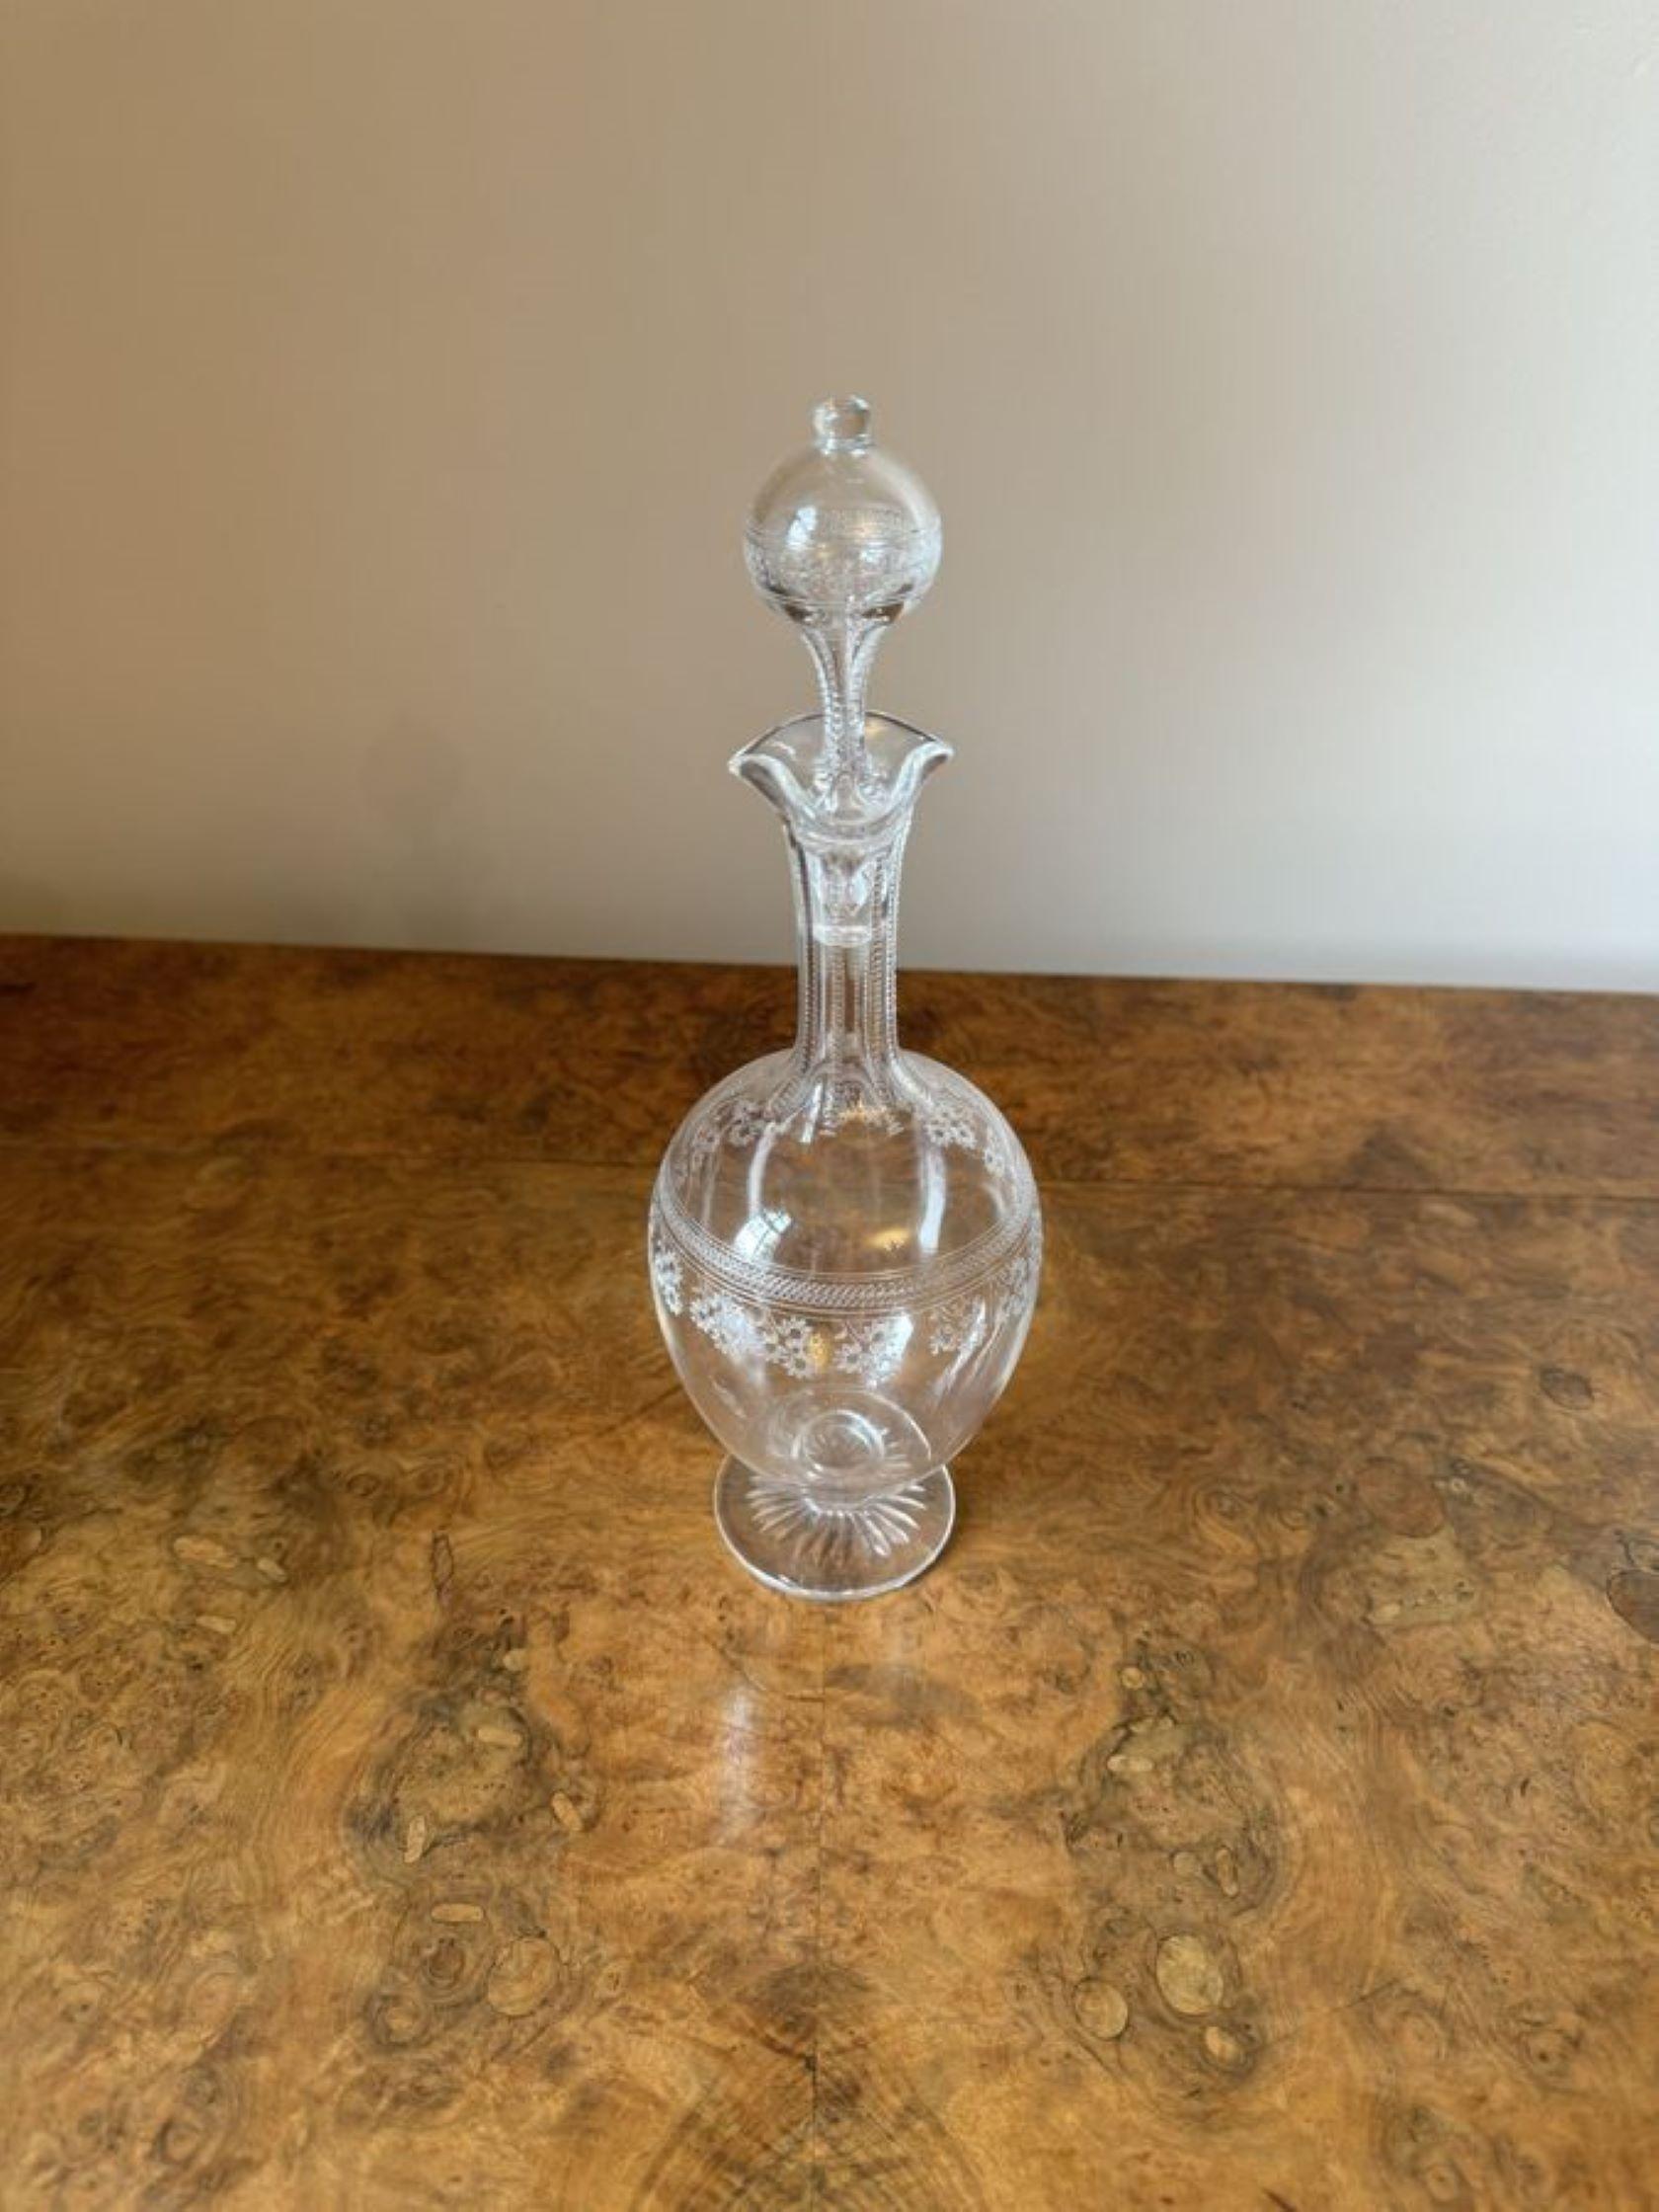 Elegant antique Victorian decanter having an elegant antique Victorian decanter decorated with flowers, with a wavy shaped top, the original stopper raised on a circular shaped base.

D. 1880